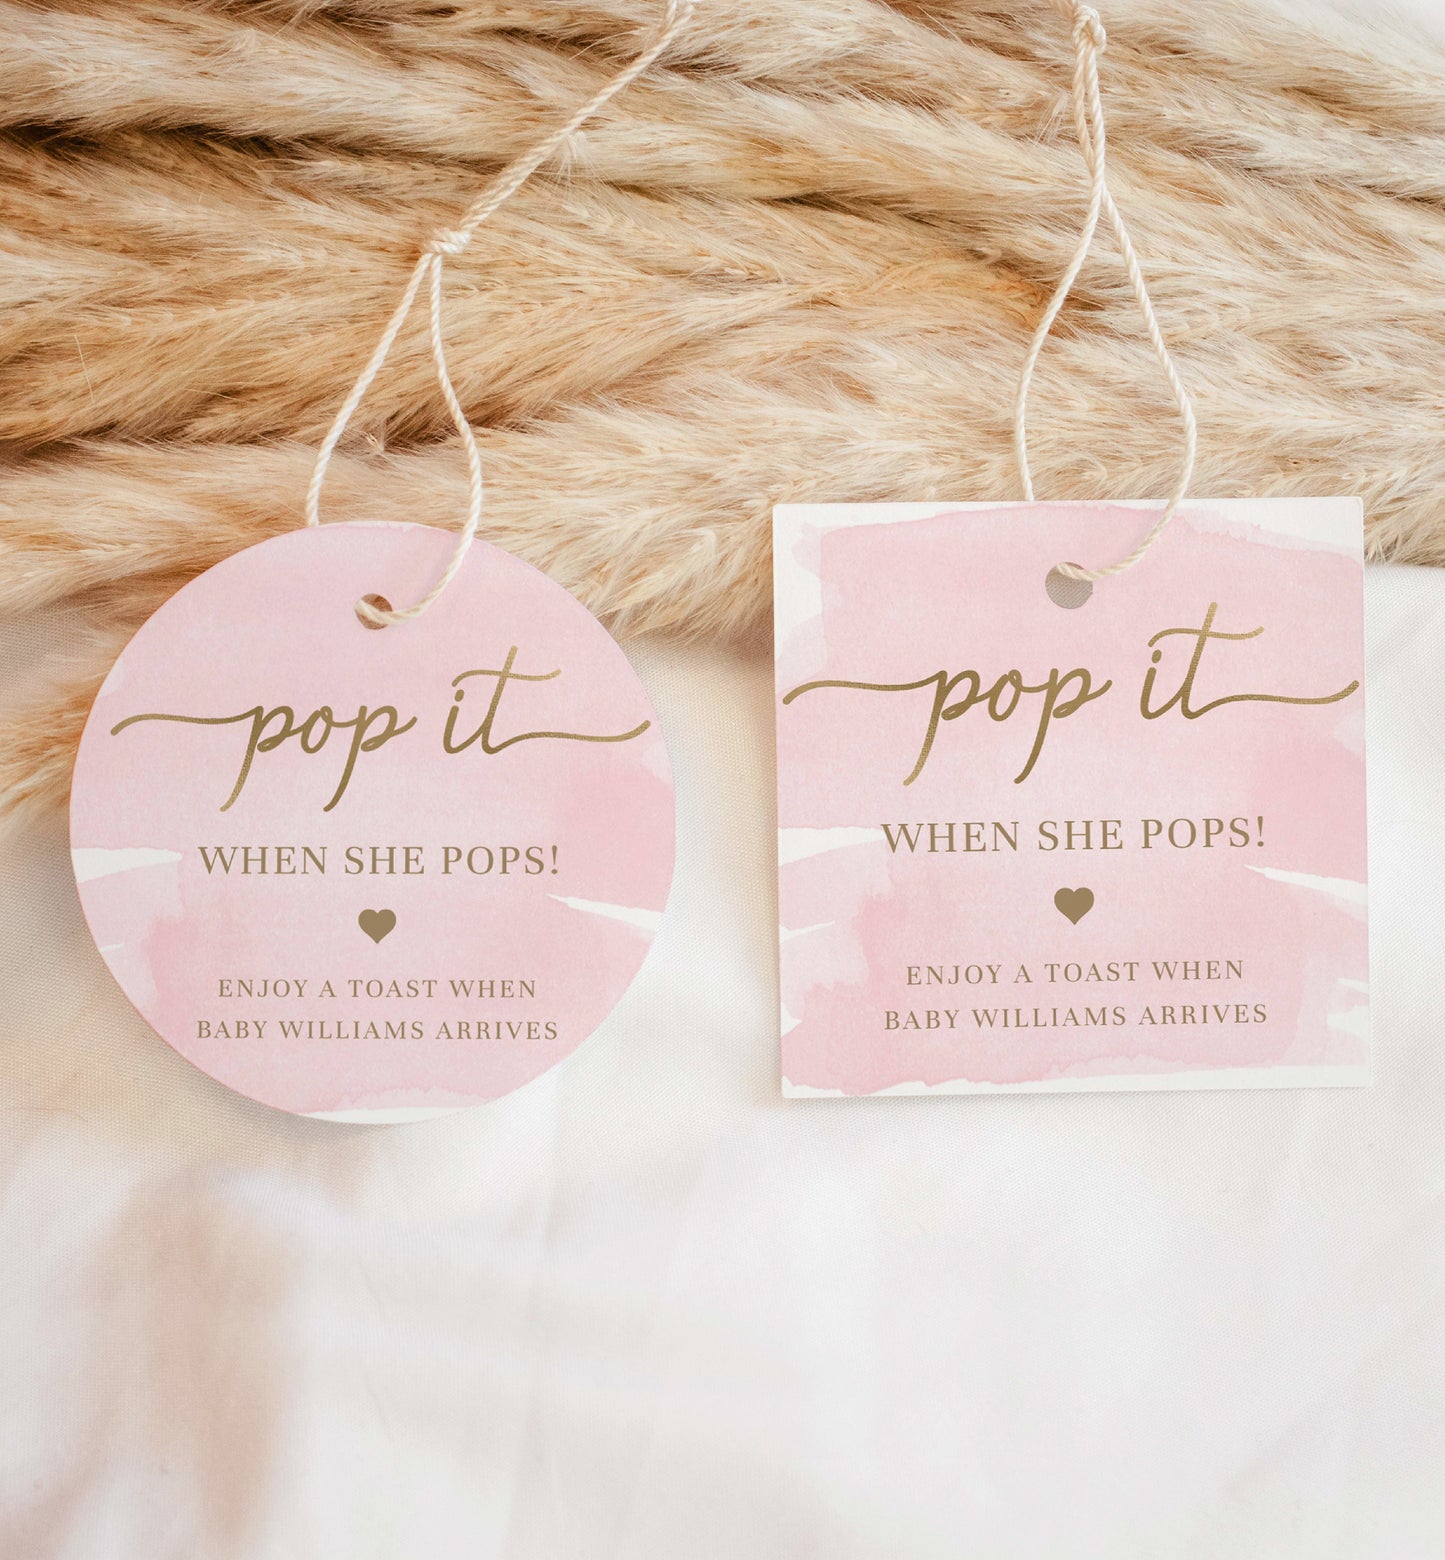 Pop It When She Pops Favor Tag Template, Baby Shower Champagne Pop It Favor Tag Printable, Pink Watercolor Mini Champagne Wine Bottle Favor Tag